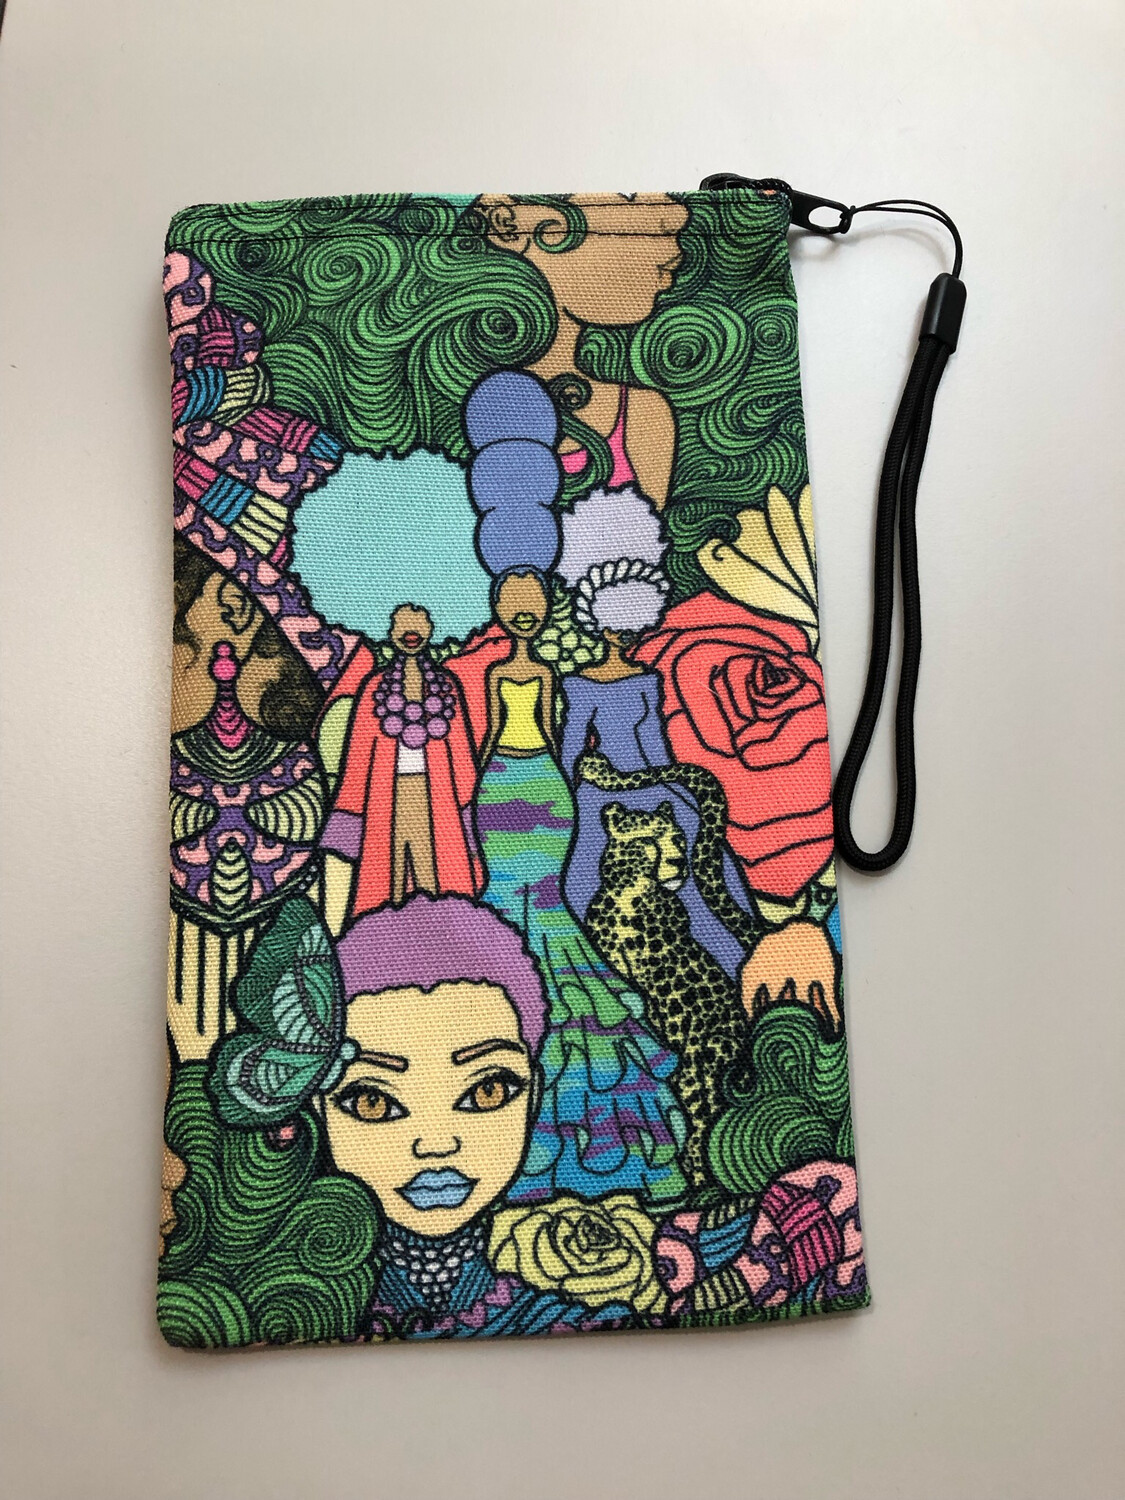 Afro Candy Land Cellphone Clutch